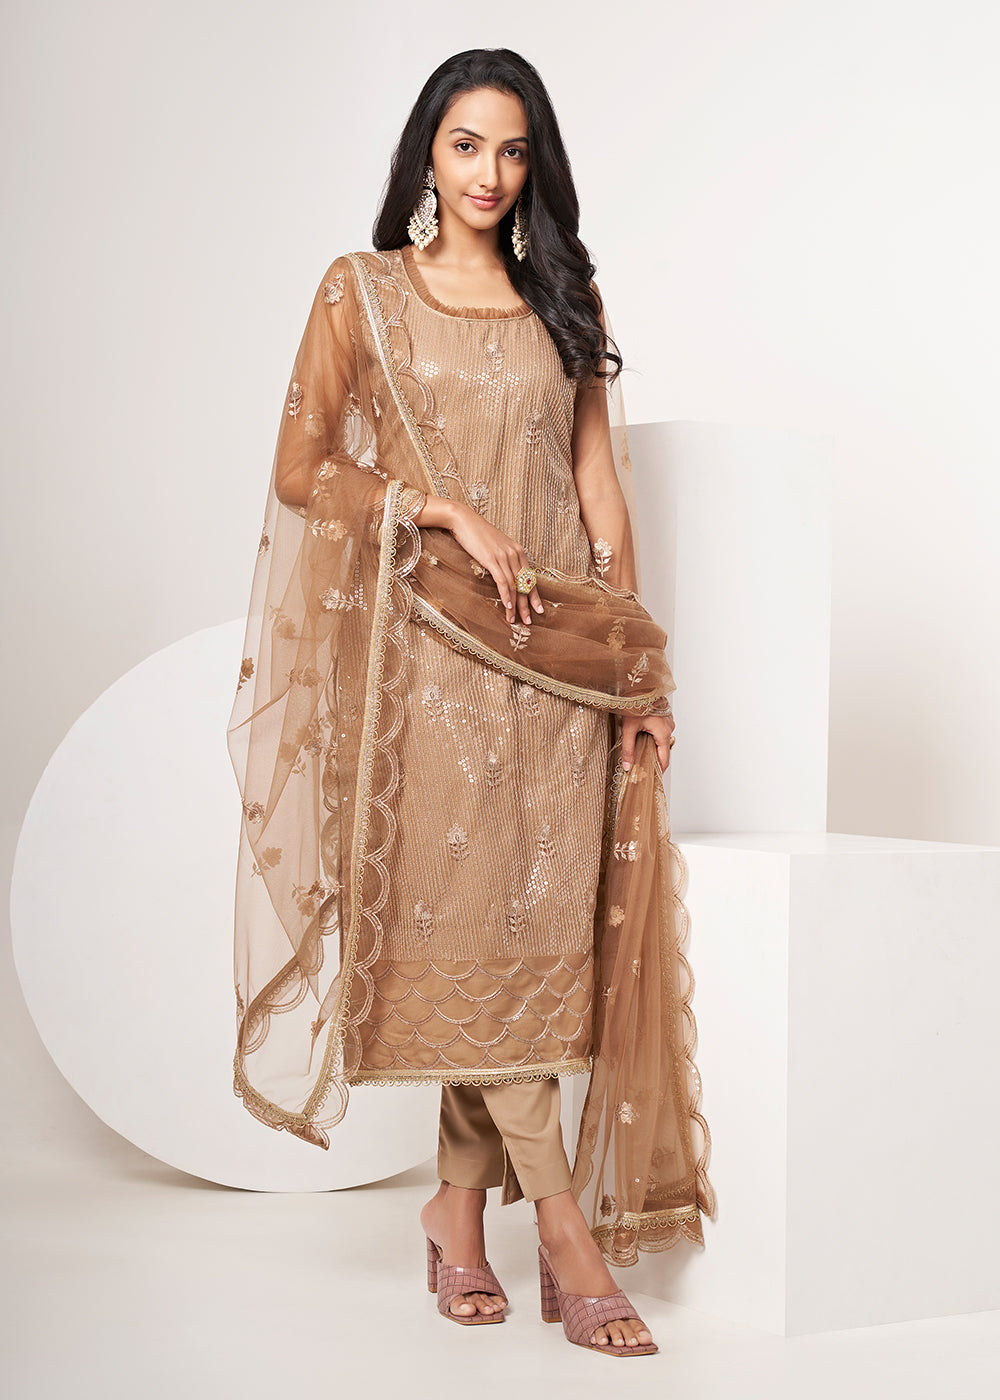 Buy Now Biscuit Brown Net Embroidered Festive Salwar Suit Online in USA, UK, Canada, Germany, Australia & Worldwide at Empress Clothing. 